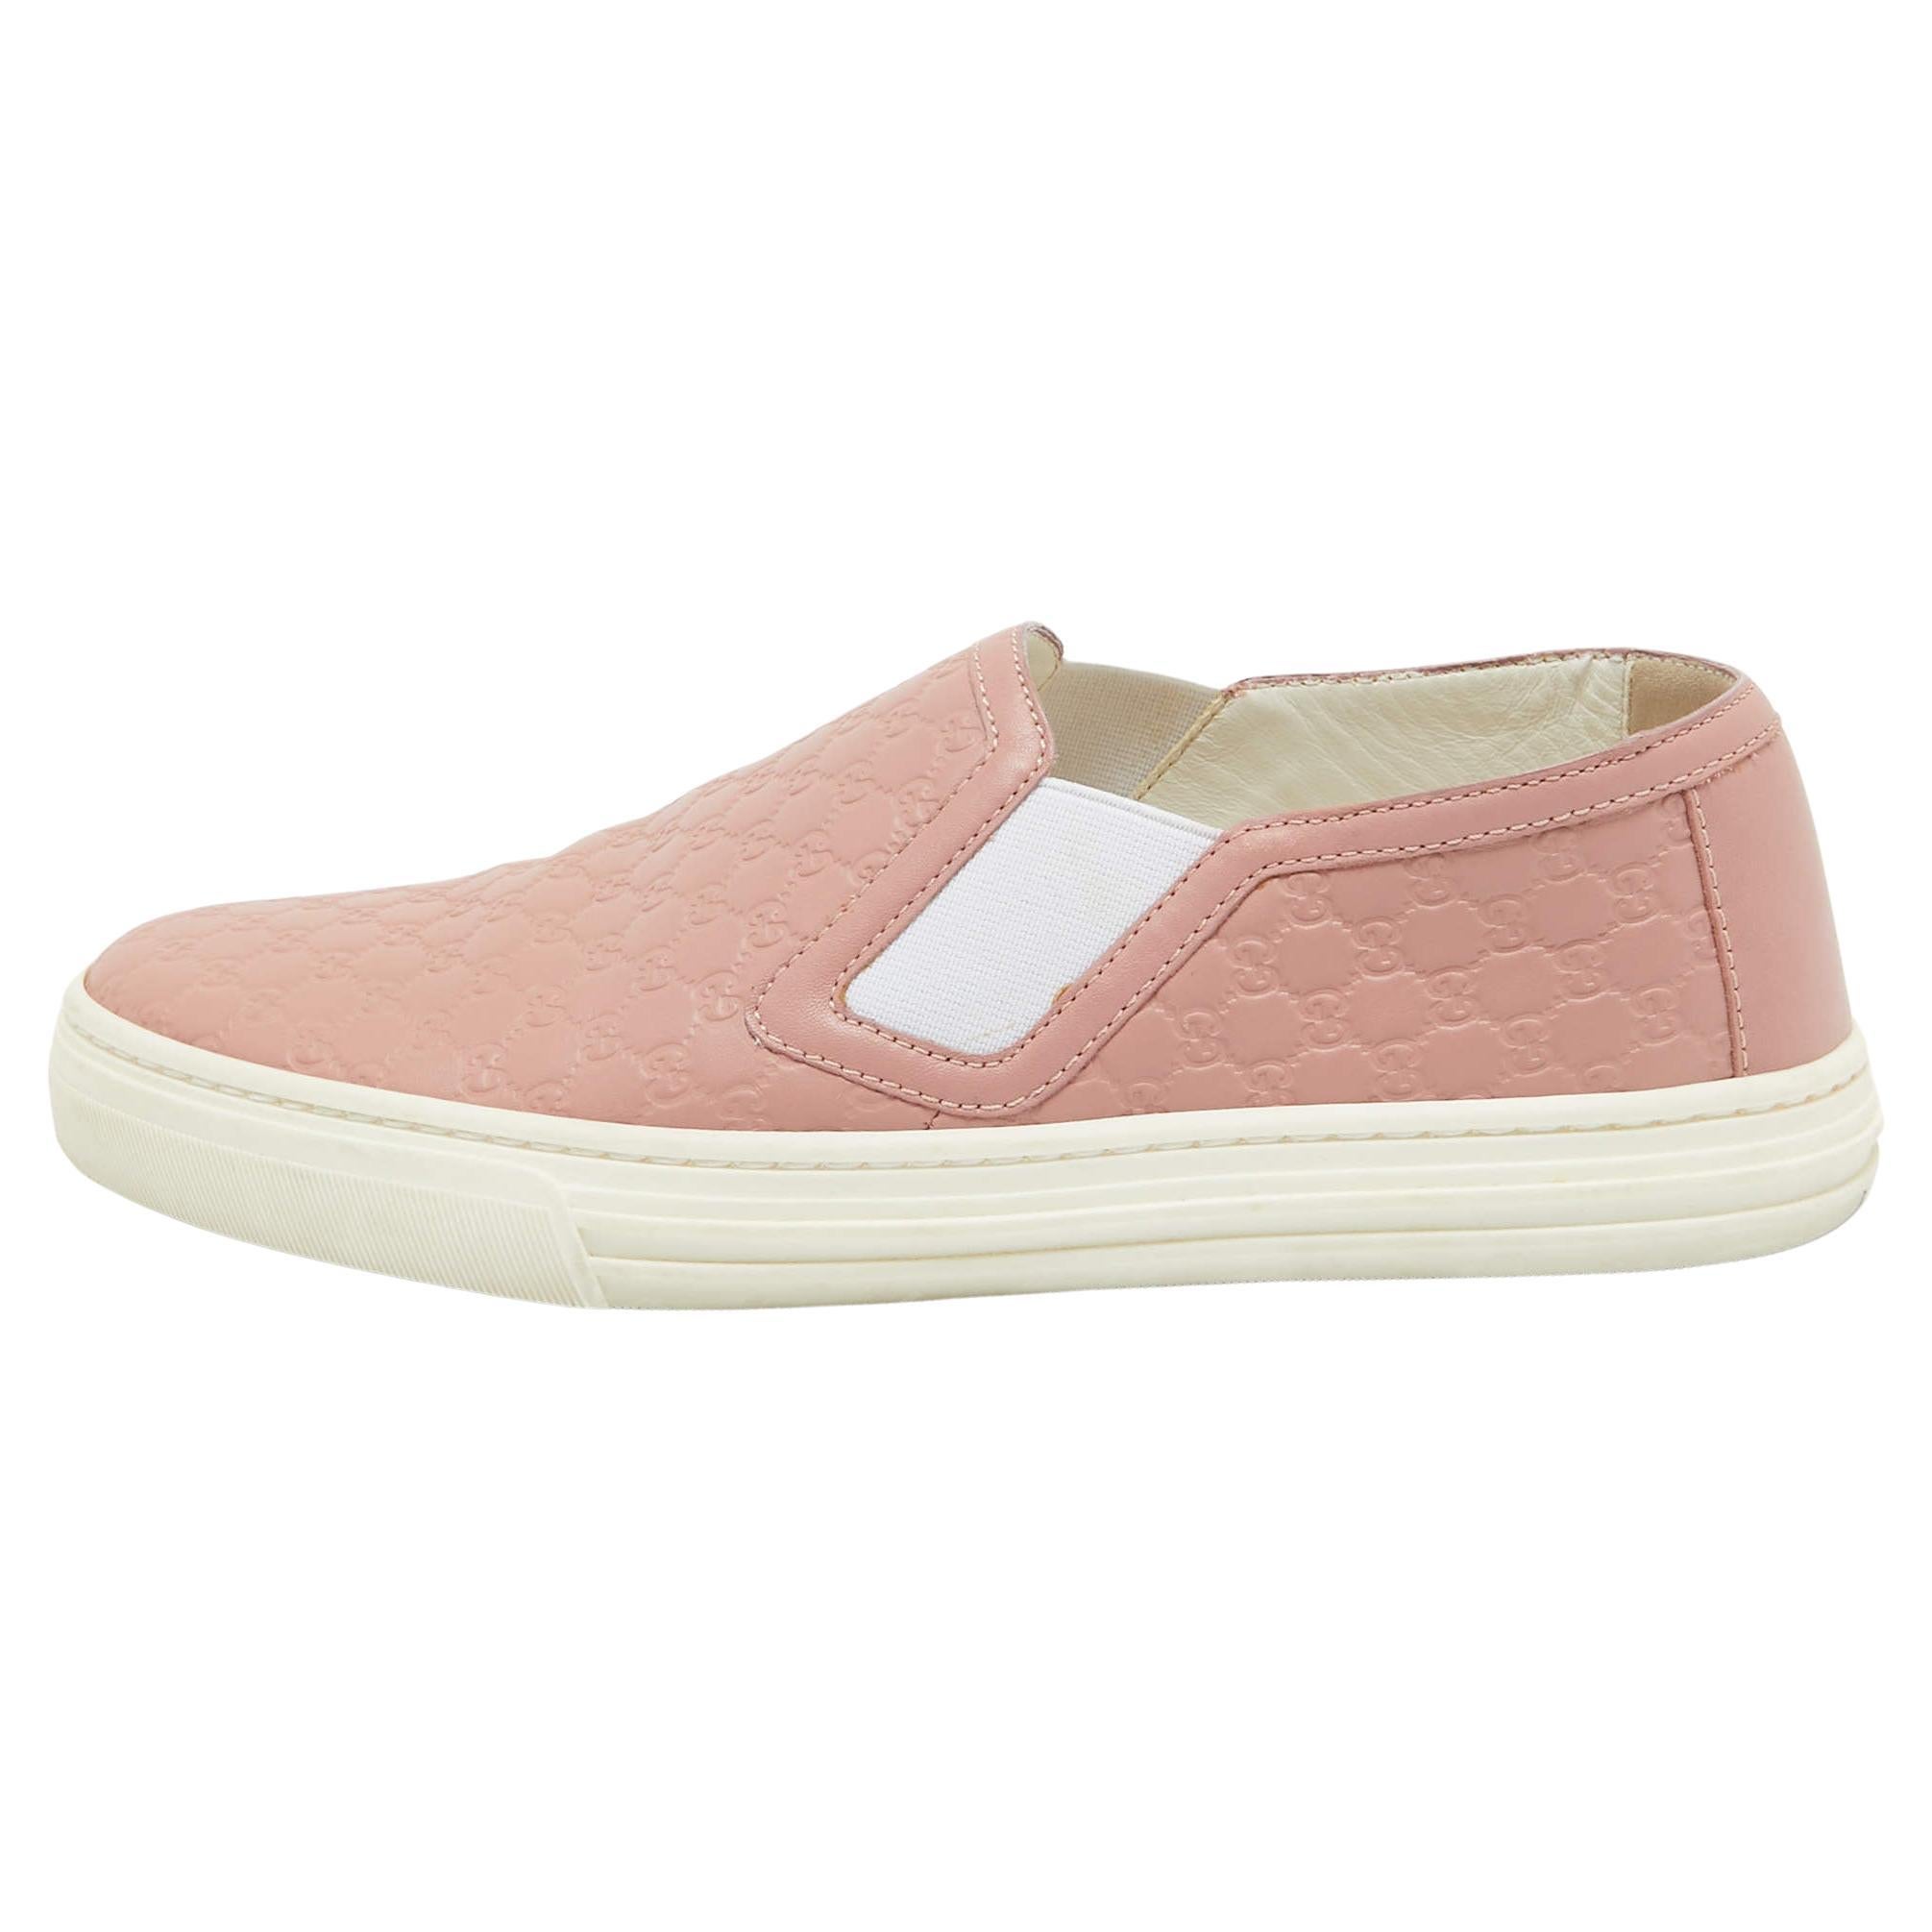 Gucci Pink Microguccissima Leather Slip On Sneakers Size 35.5 For Sale